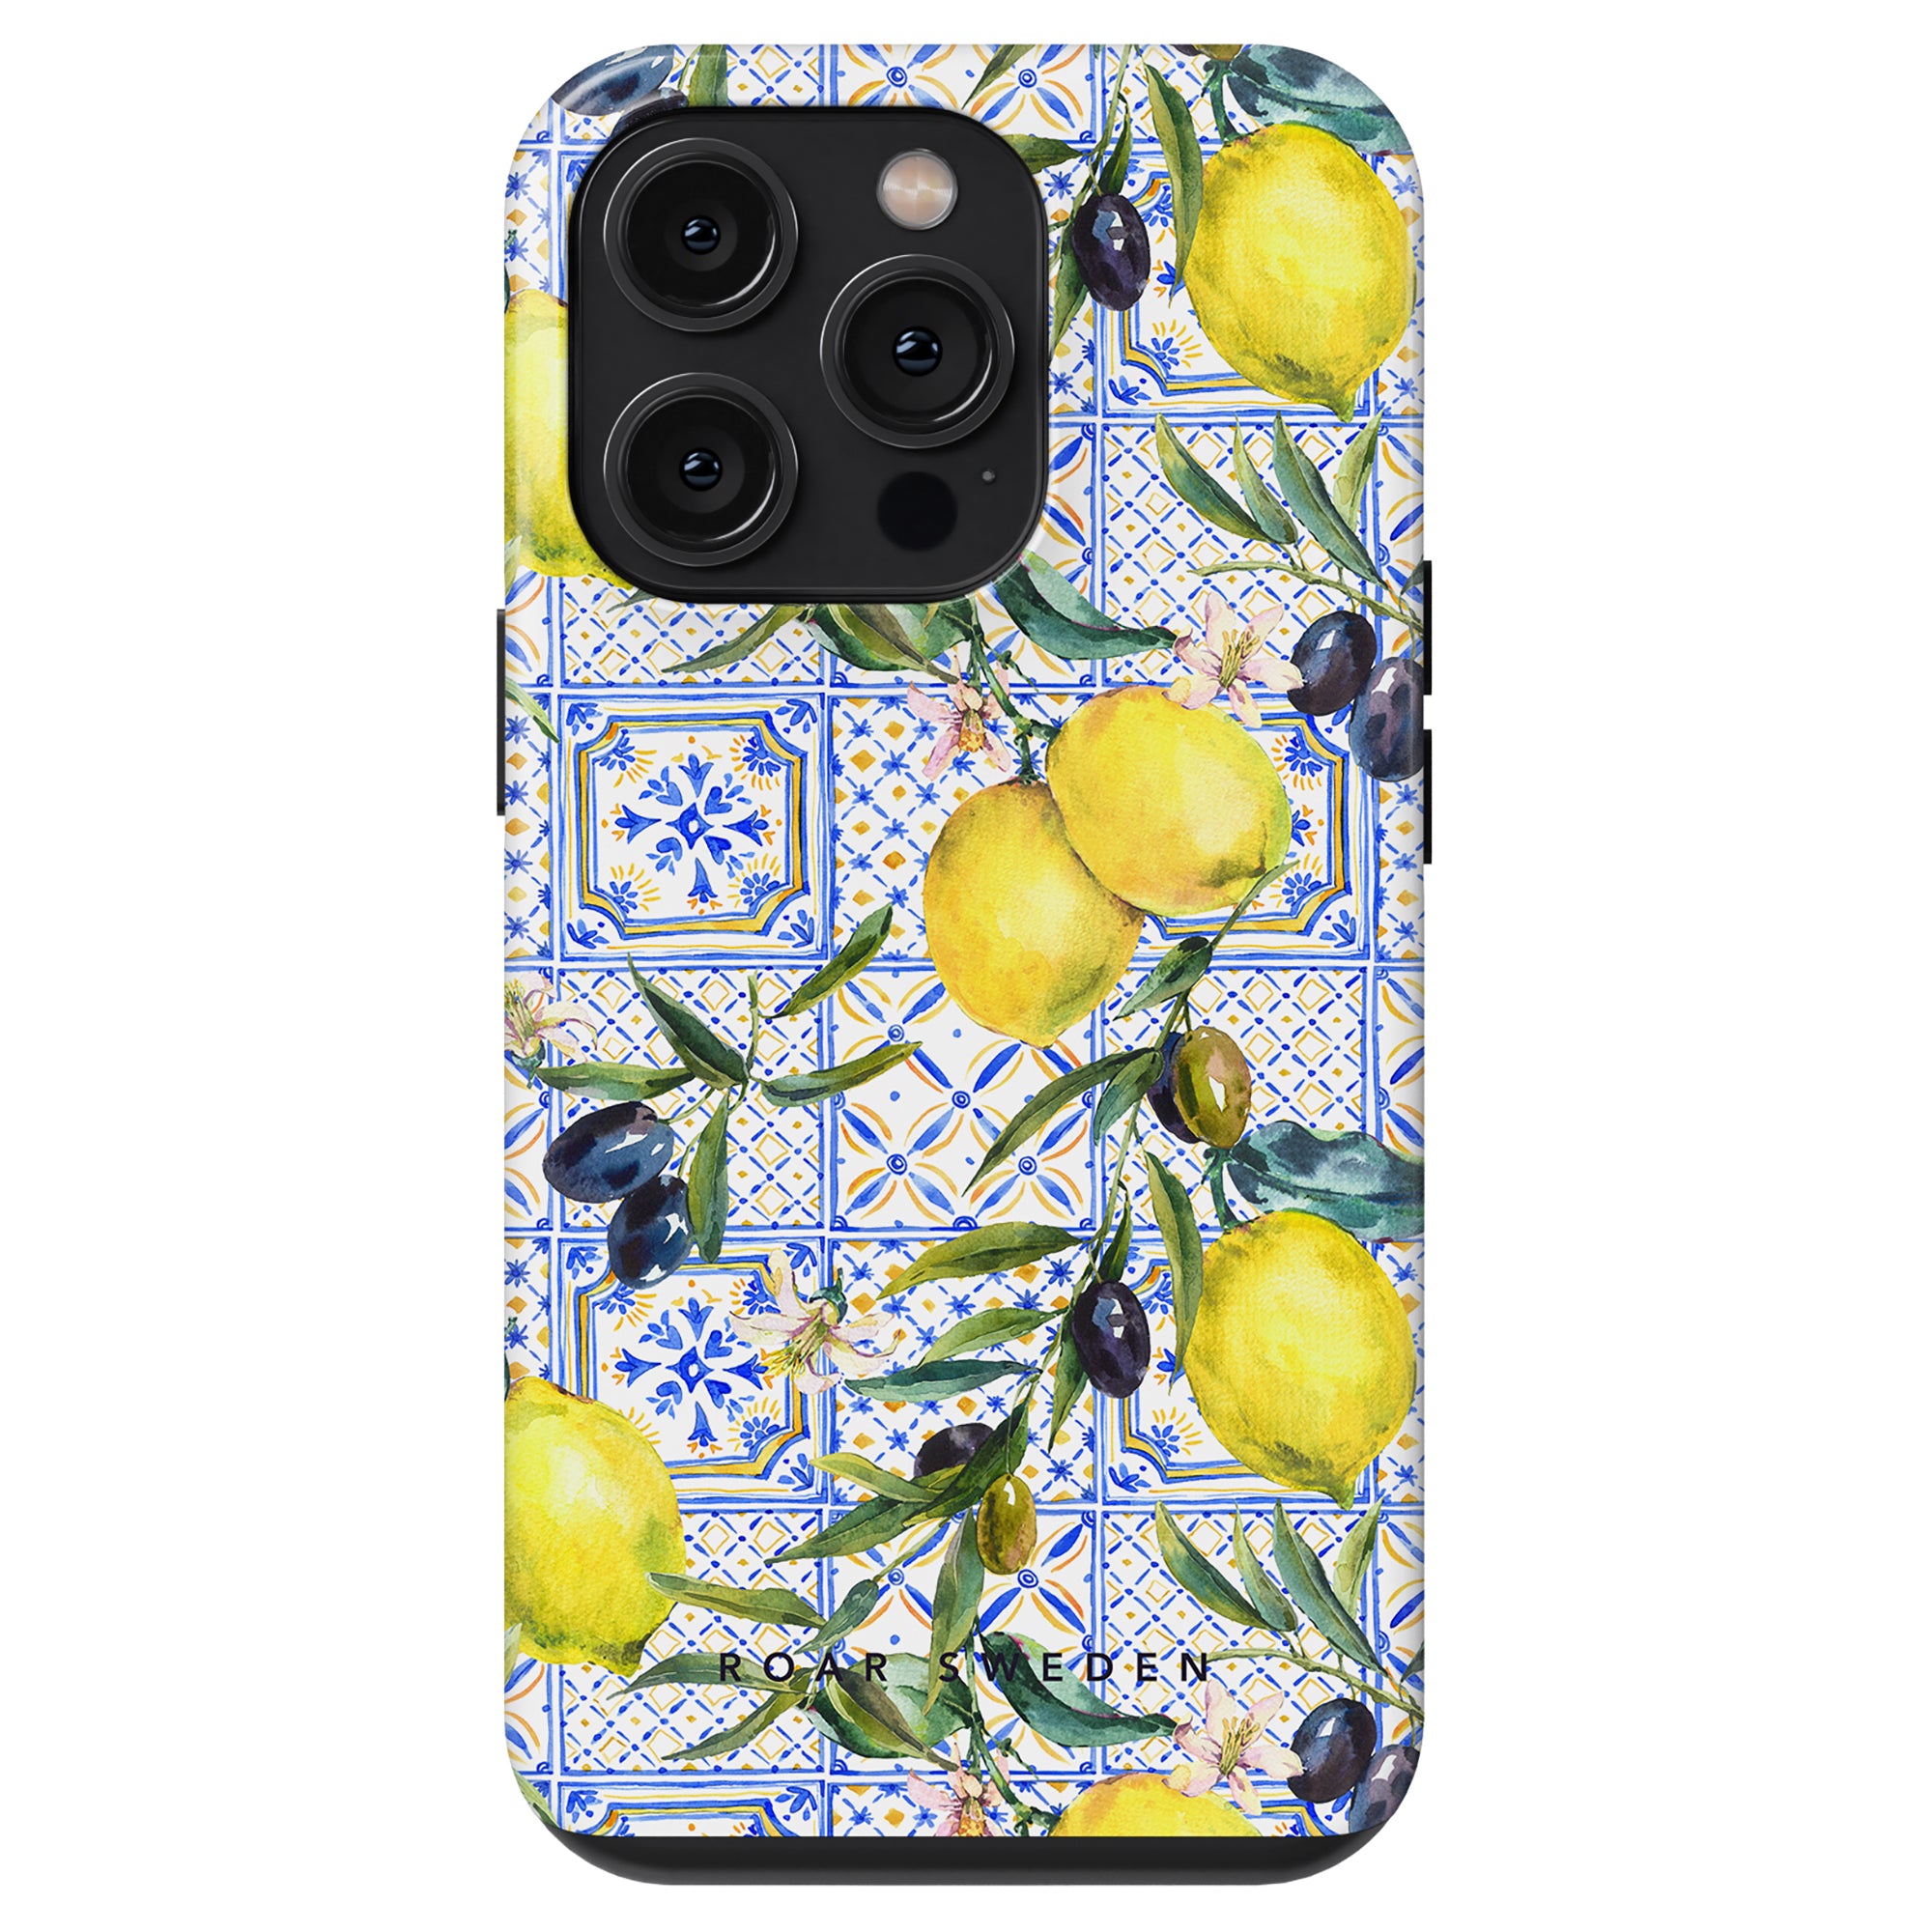 Amalfi - Tough Case with a waterproof lemon and tile pattern design, featuring cutouts for camera lenses.